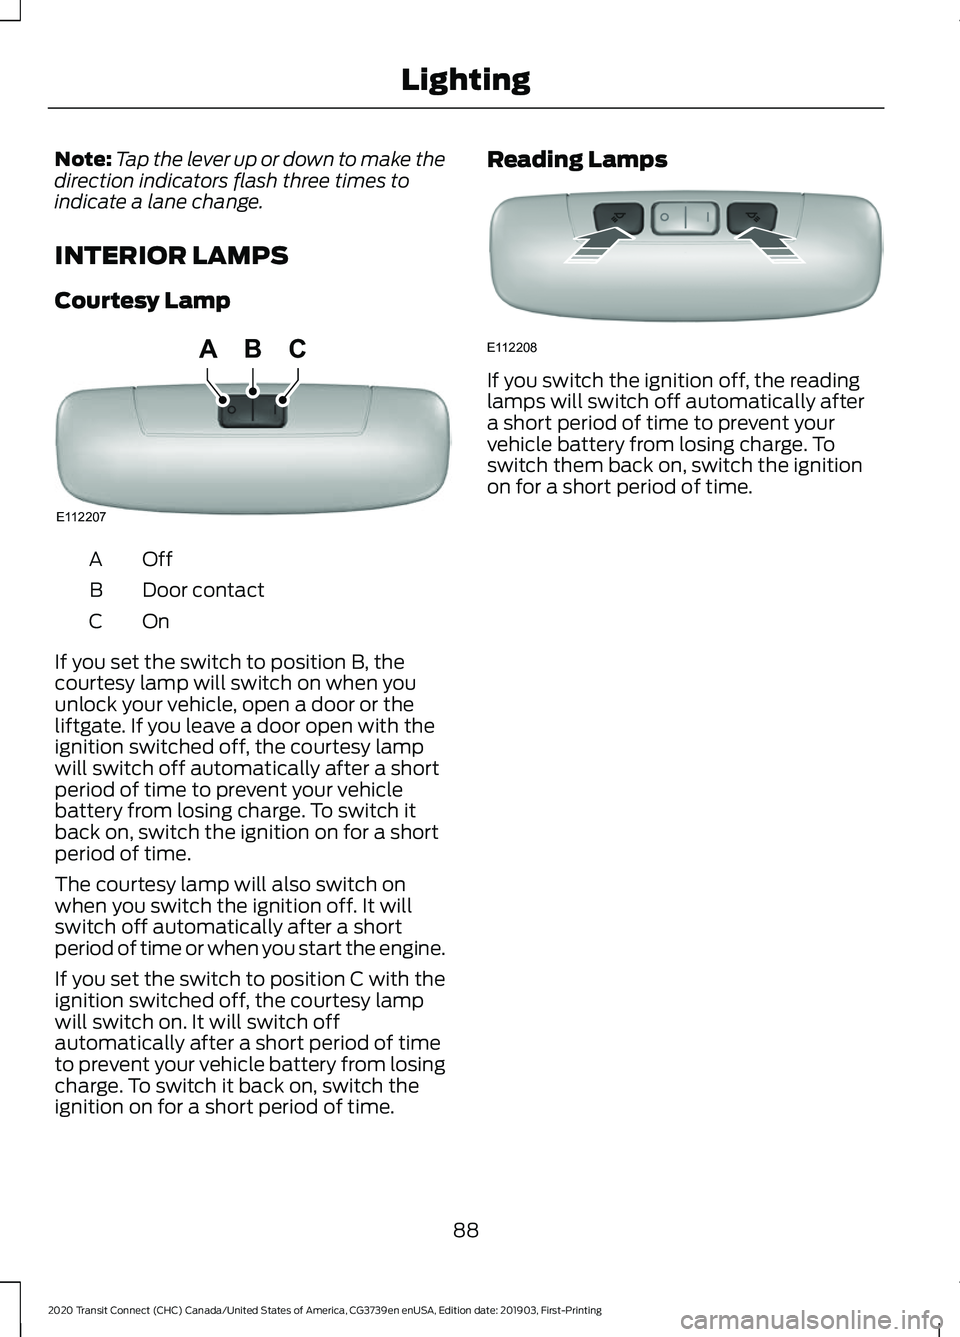 FORD TRANSIT CONNECT 2020  Owners Manual Note:
Tap the lever up or down to make the
direction indicators flash three times to
indicate a lane change.
INTERIOR LAMPS
Courtesy Lamp OffA
Door contact
B
OnC
If you set the switch to position B, t